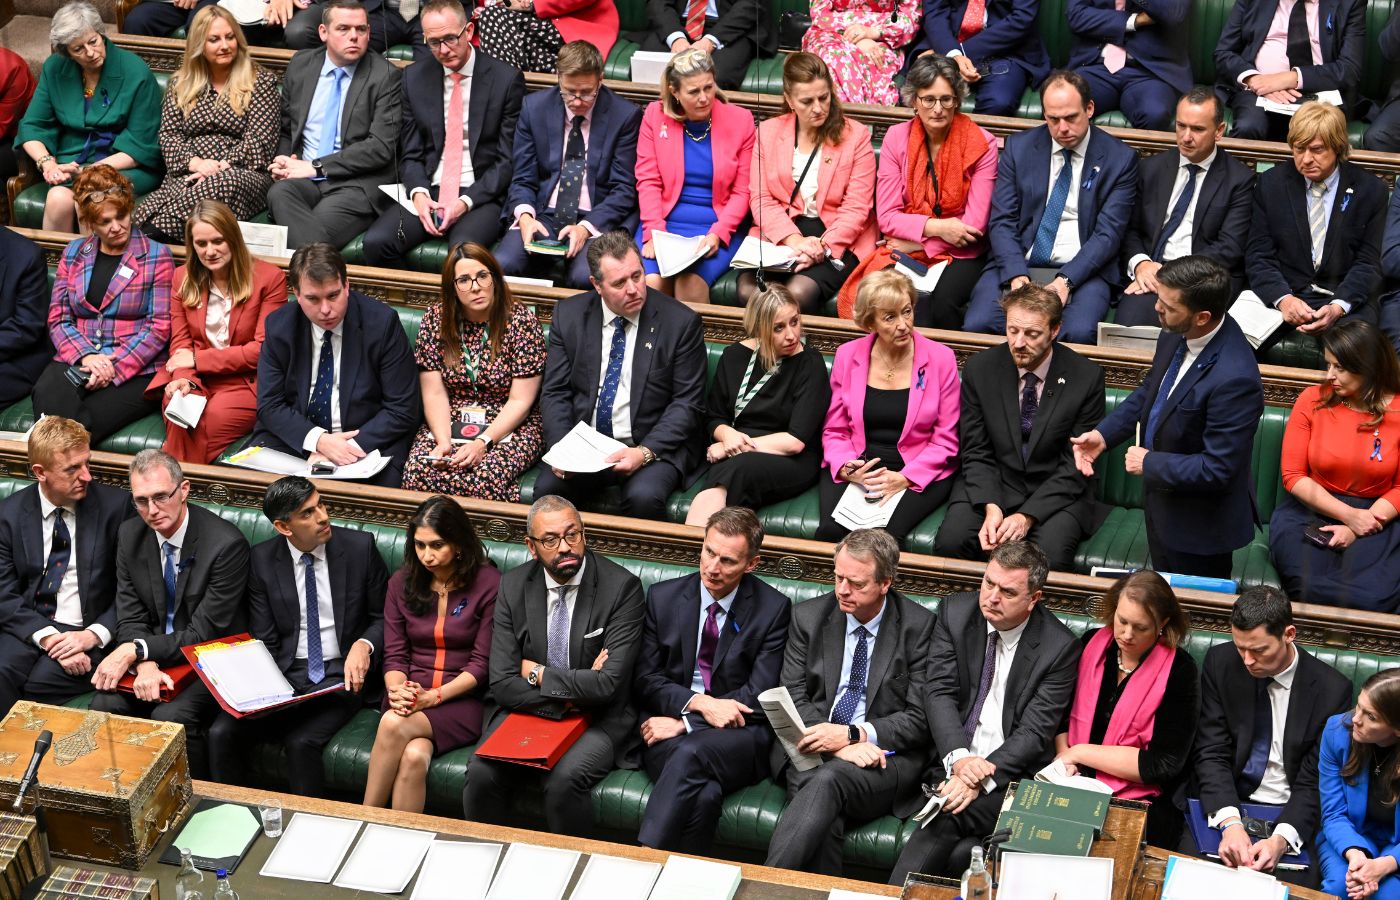 Theresa May, Lisa Cameron and Douglas Ross in the top left in the House of Commons during PMQs.